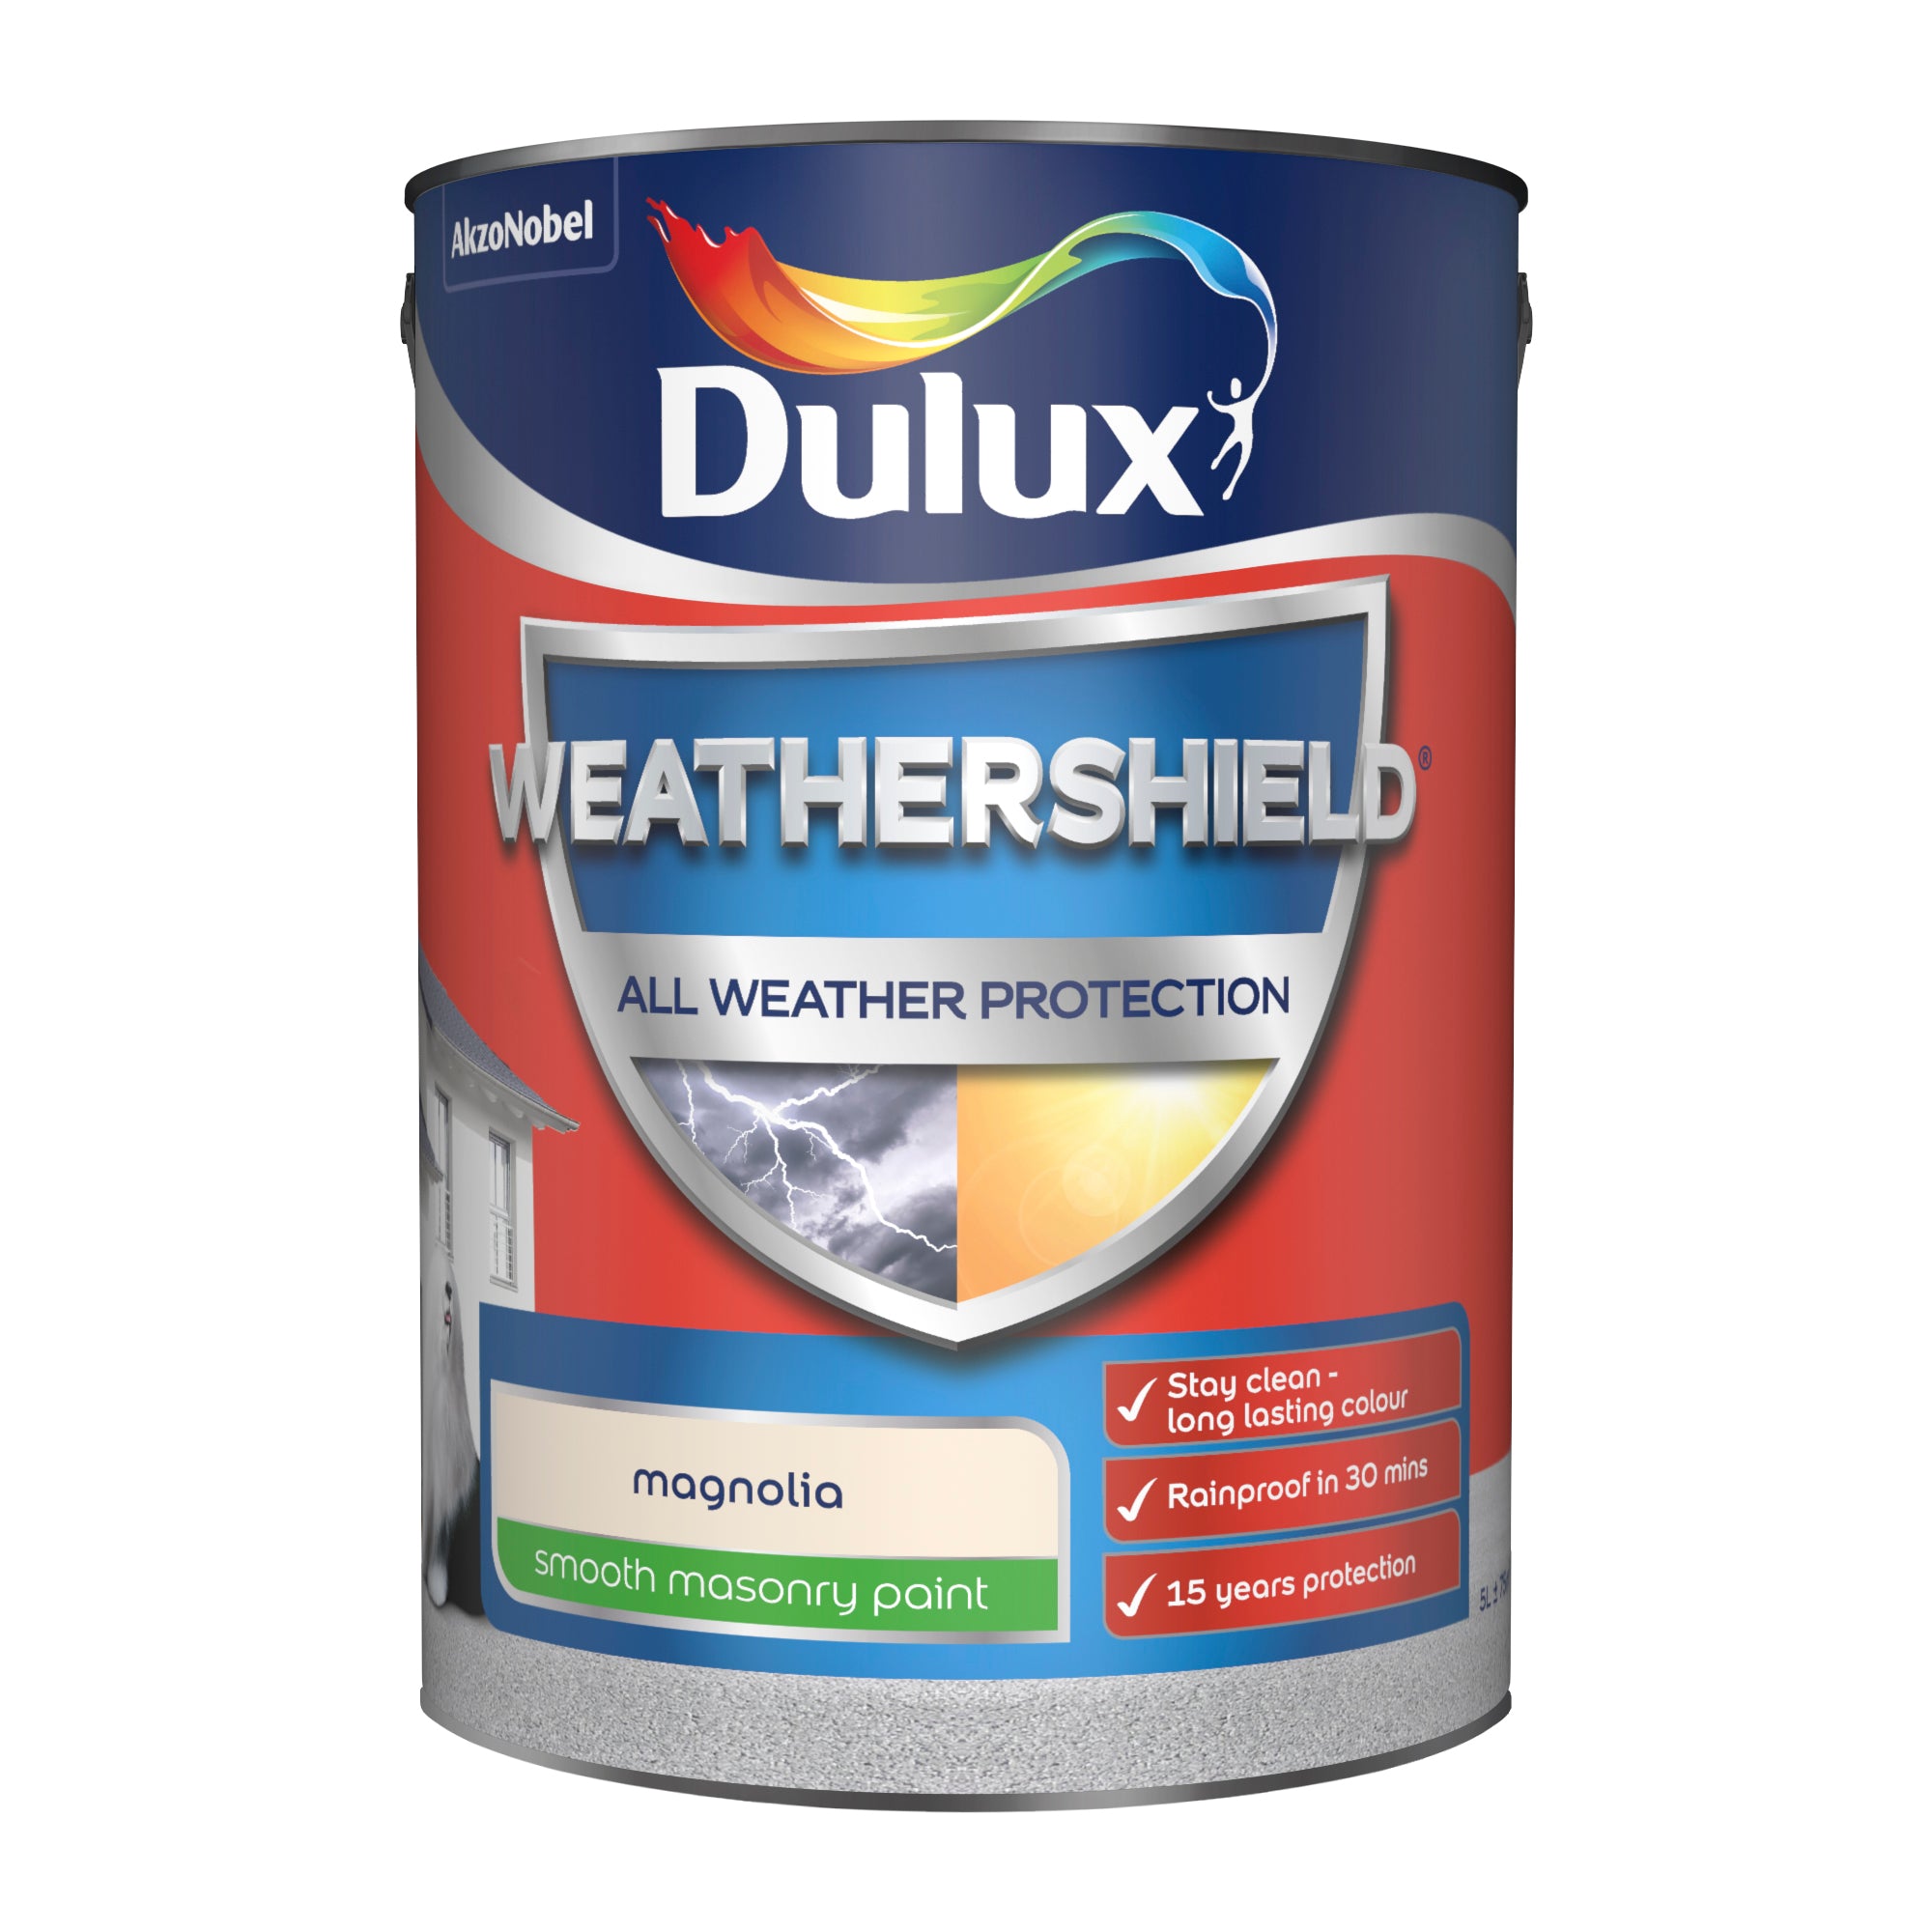 Dulux Weathershield All Weather Protection Smooth Magnolia 5L